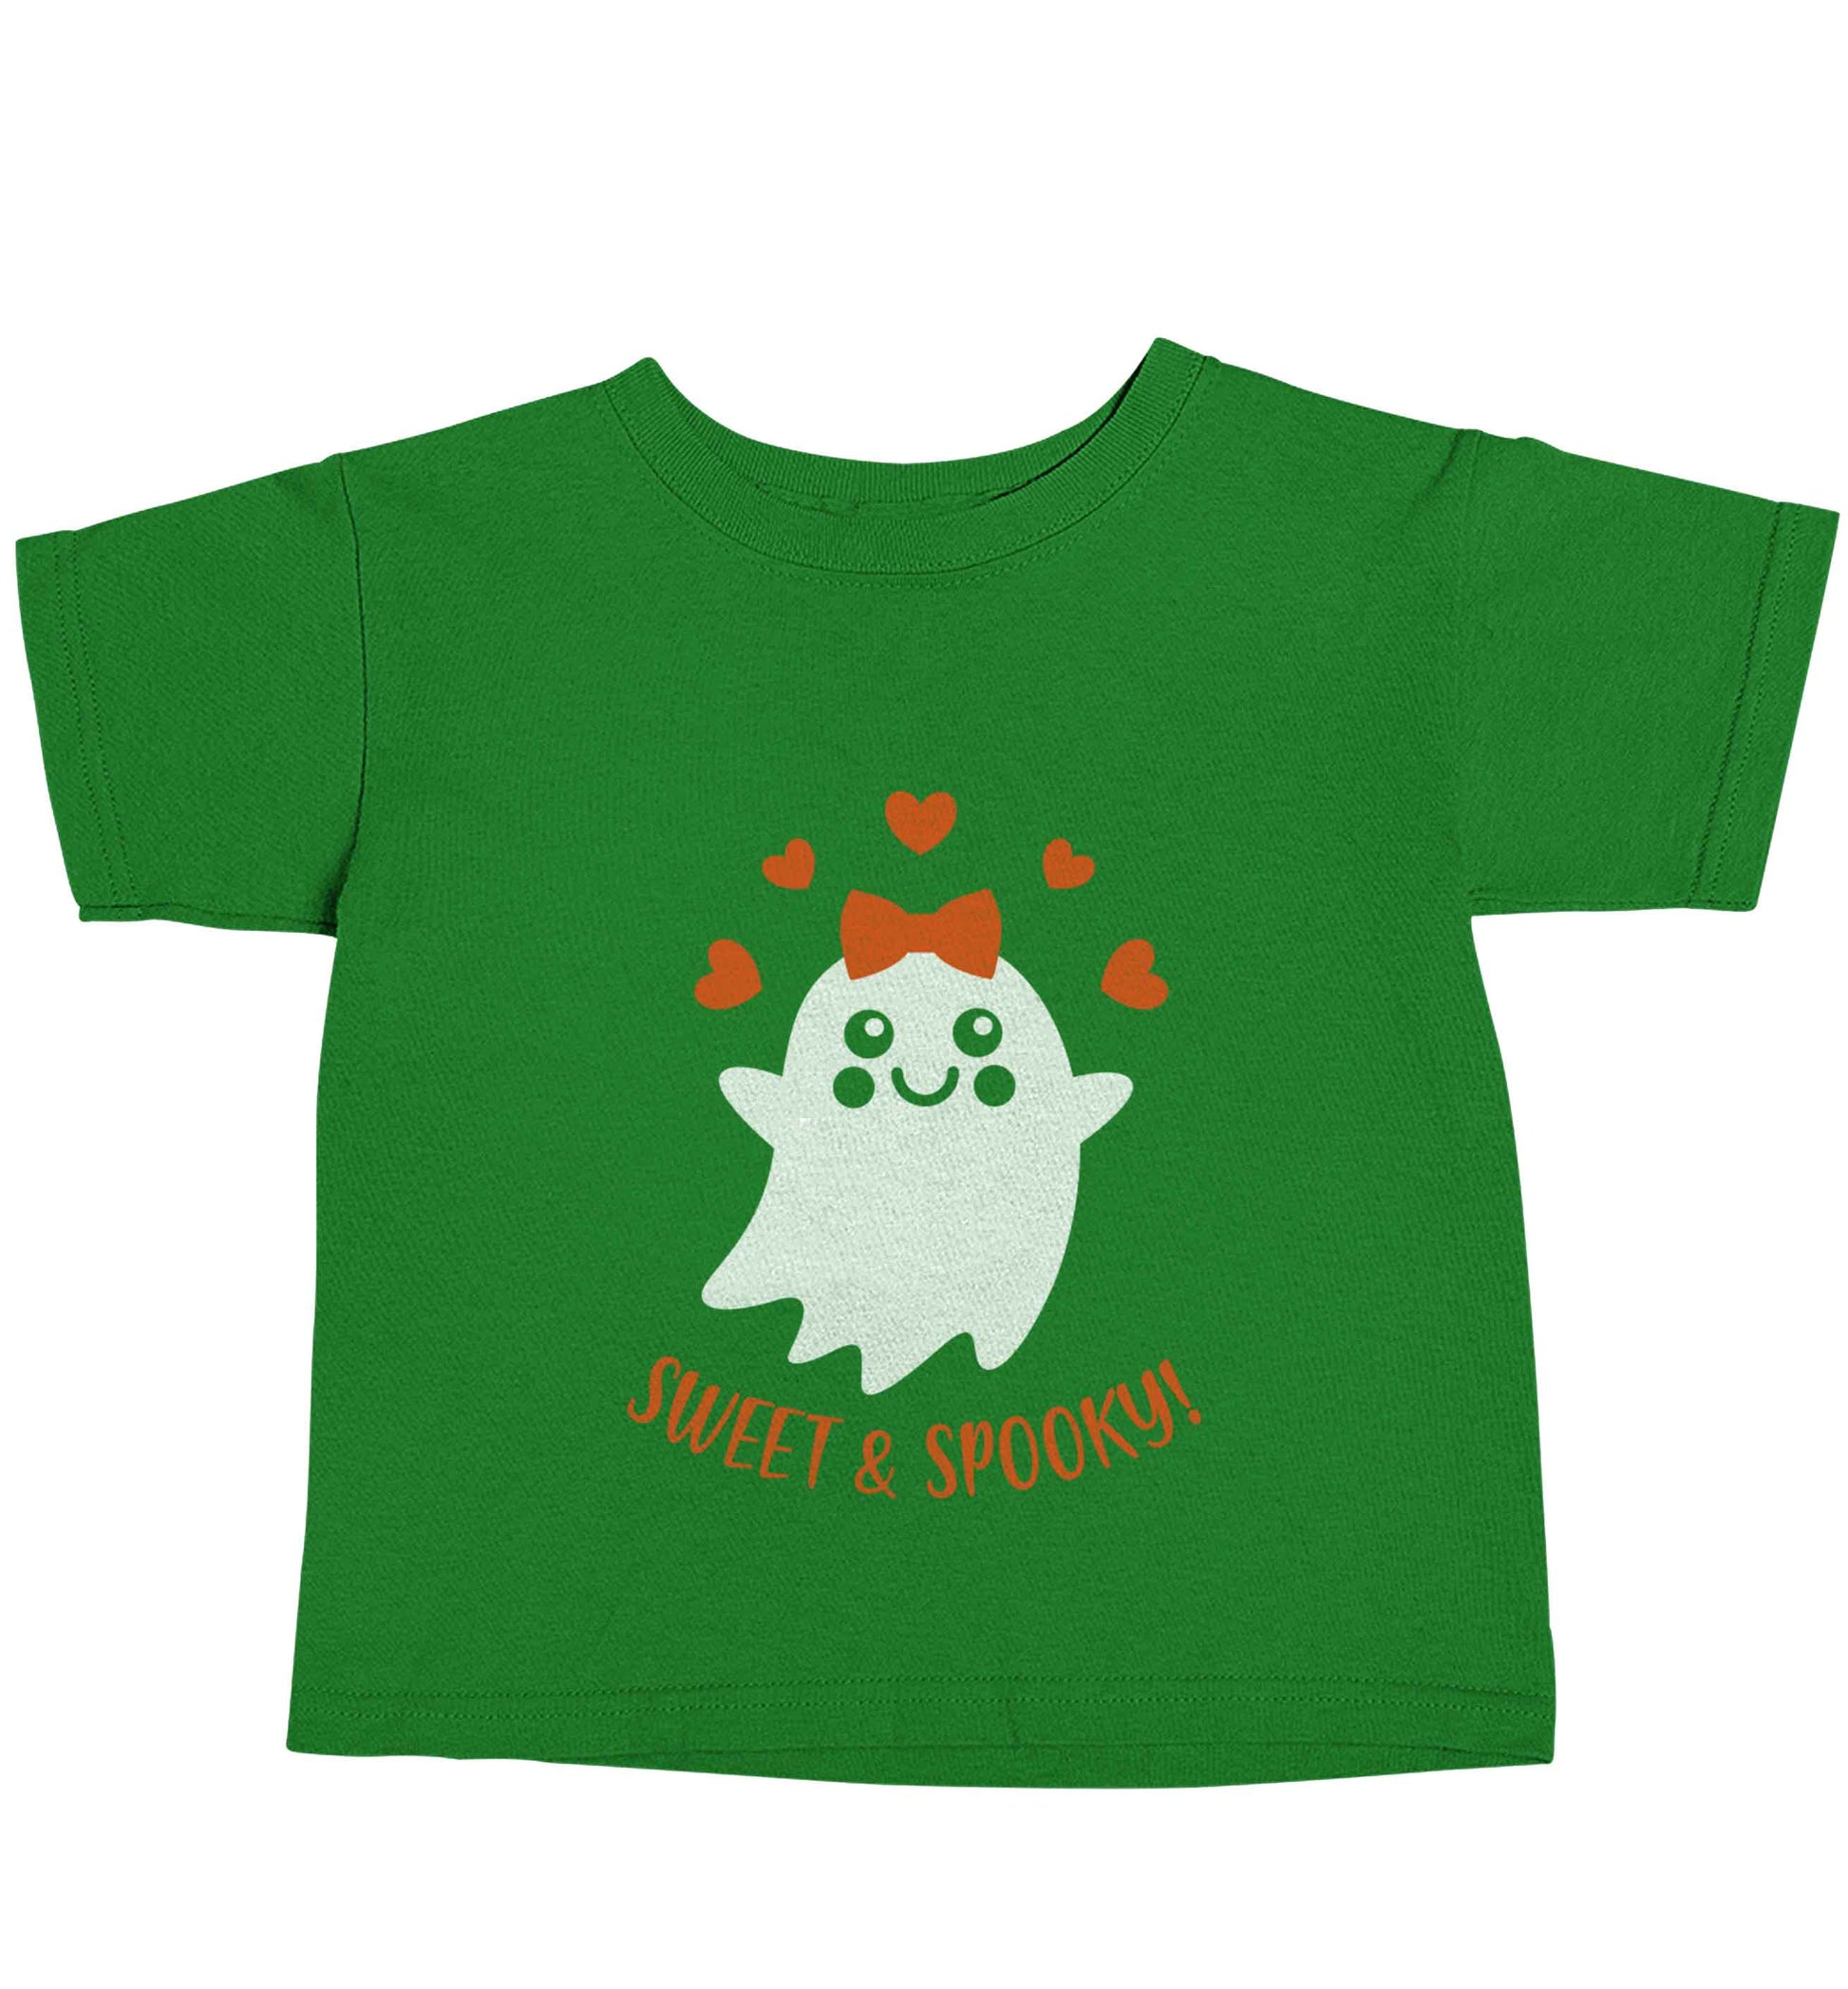 Sweet and spooky green baby toddler Tshirt 2 Years